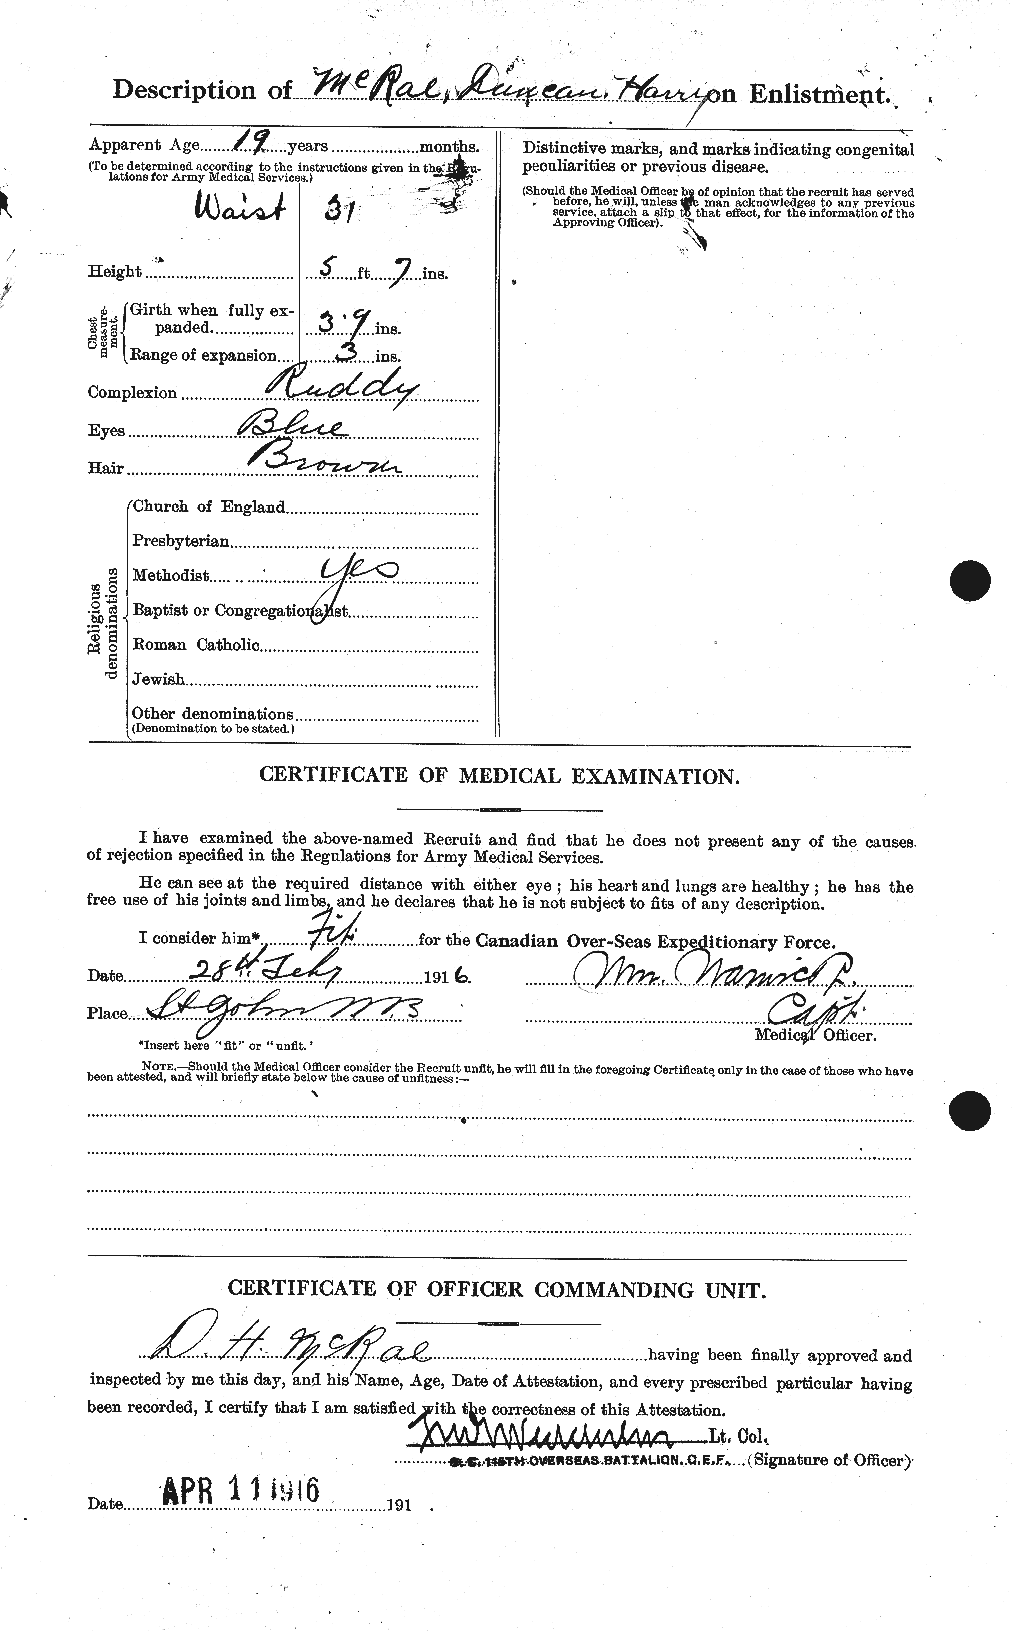 Personnel Records of the First World War - CEF 542696b